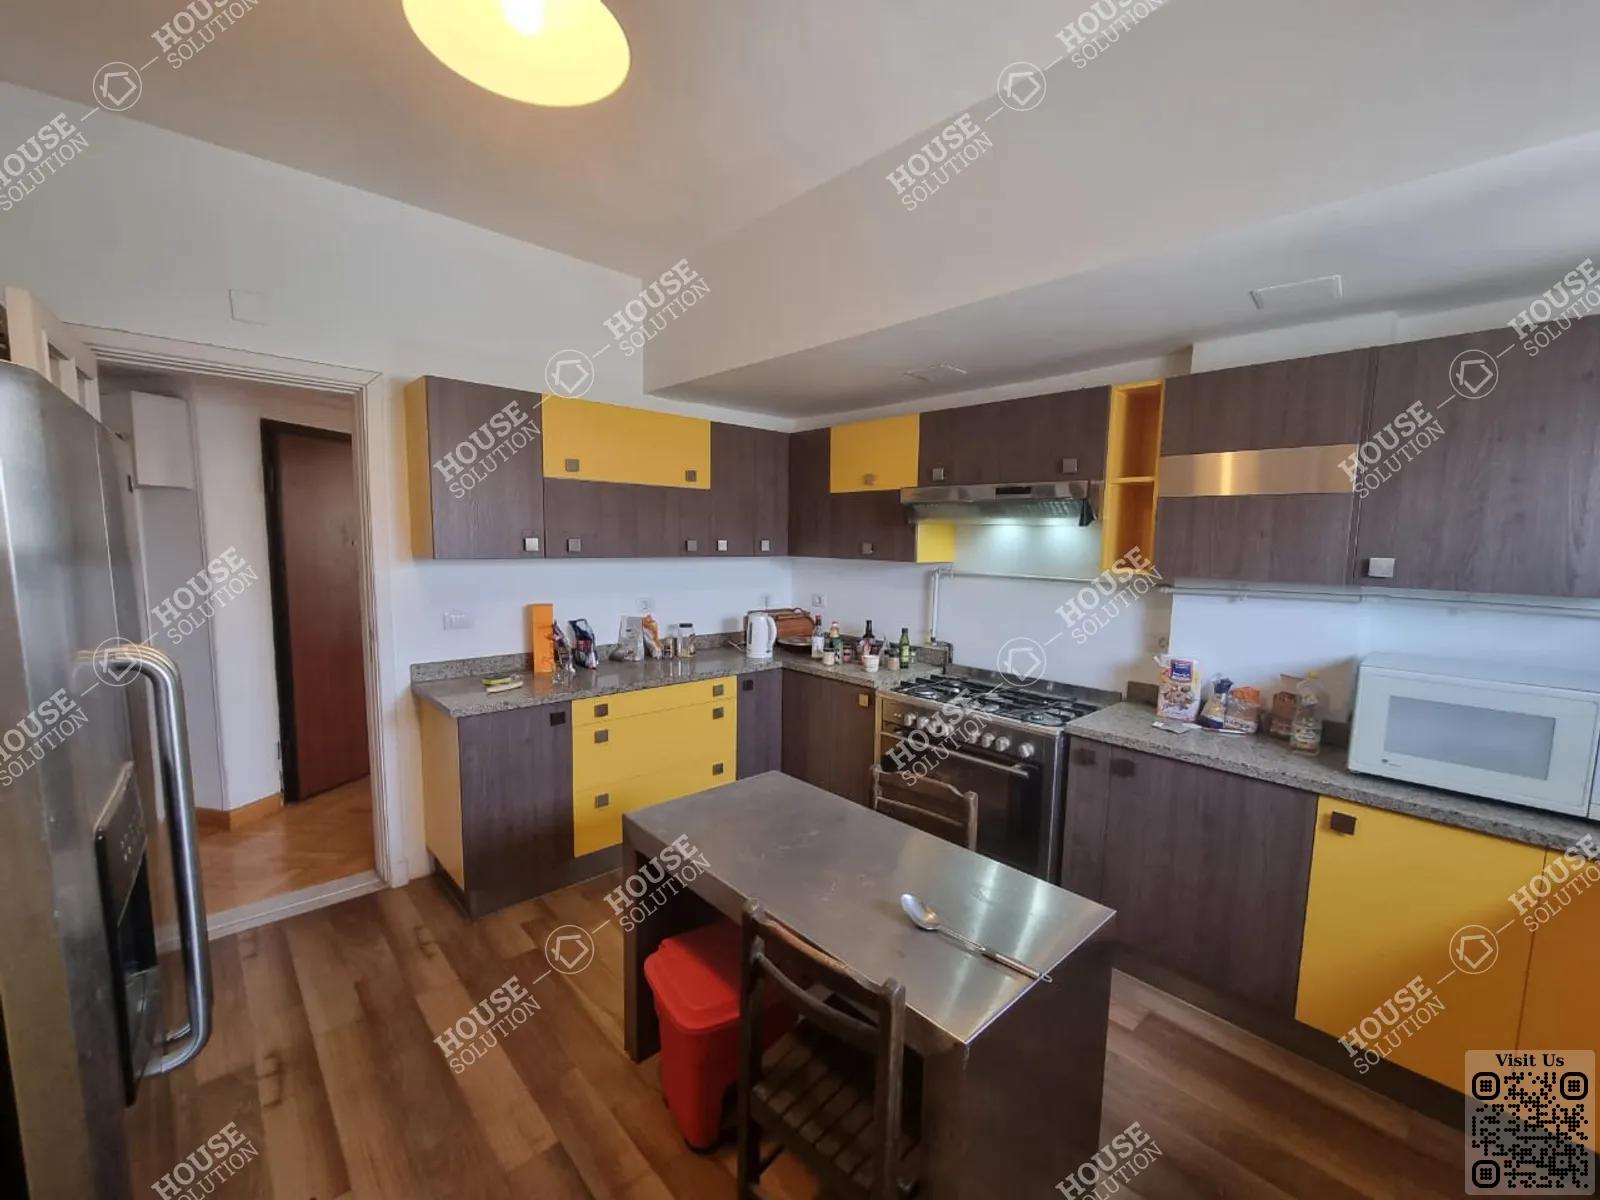 KITCHEN  @ Apartments For Rent In Maadi Maadi Degla Area: 220 m² consists of 3 Bedrooms 2 Bathrooms Furnished 5 stars #5421-1